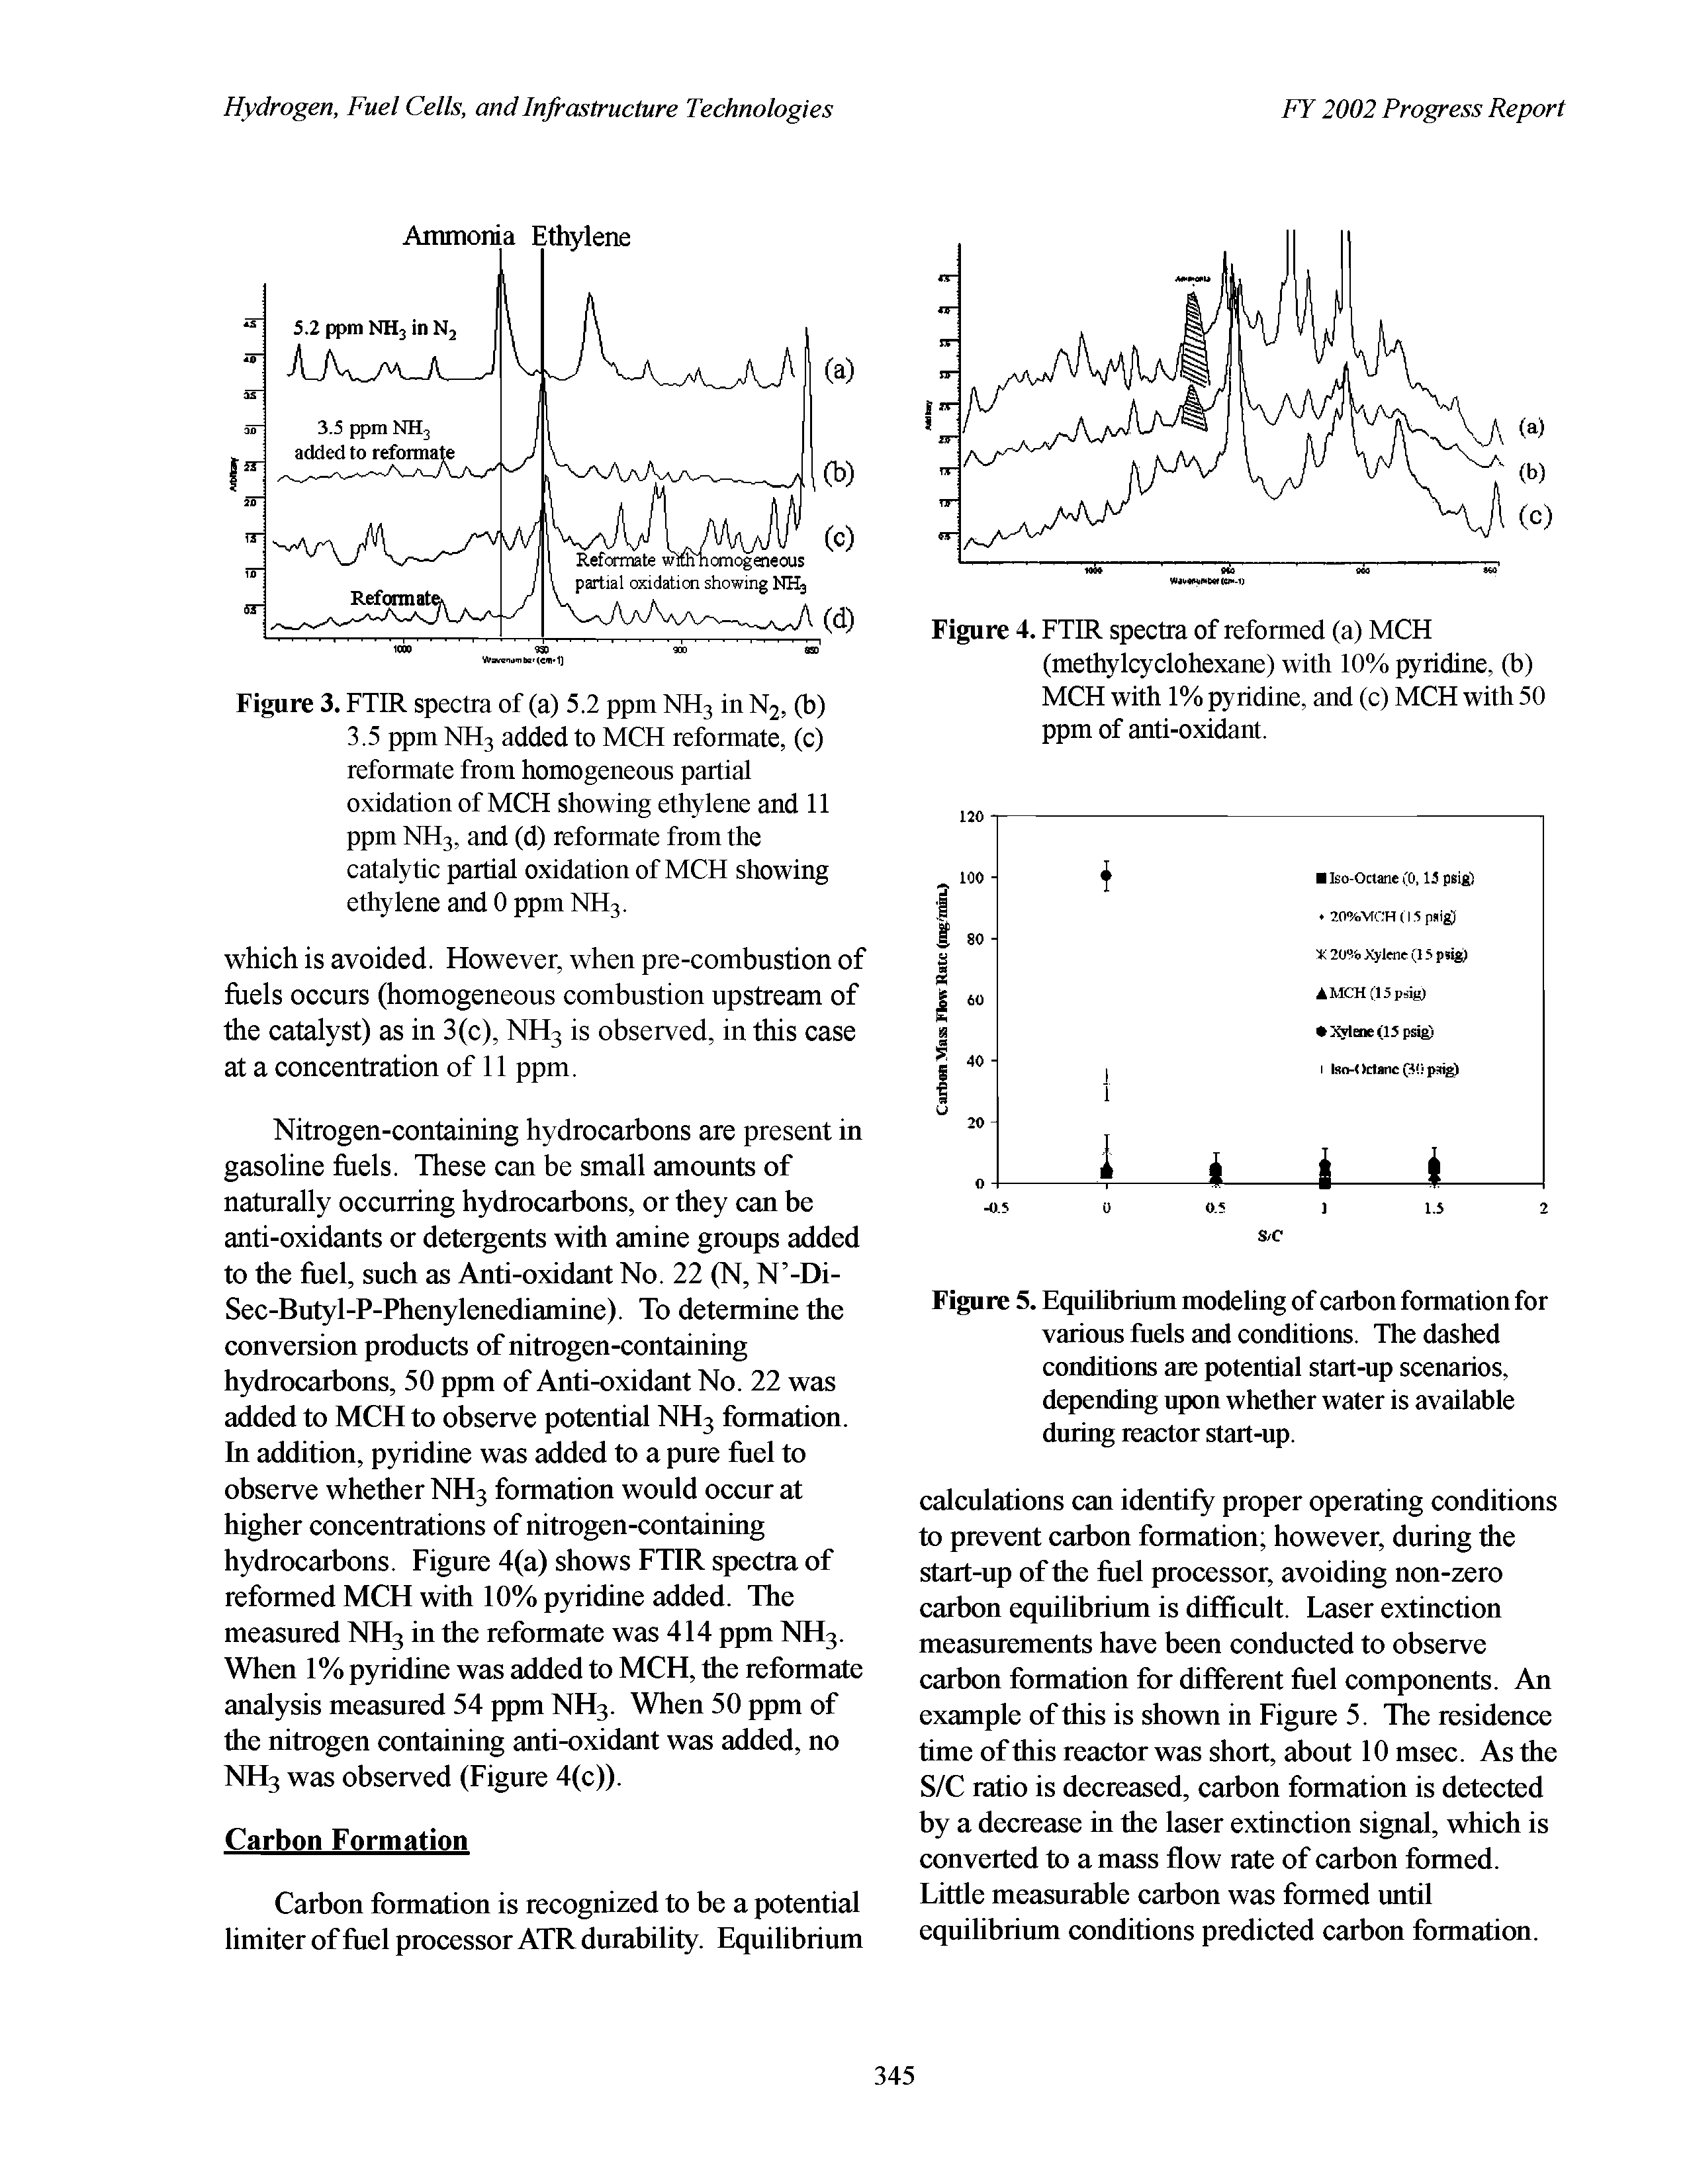 Figure 5. Equihbrium modeling of carbon formation for various fuels and conditions. The dashed conditions ate potential start-up scenarios, depending upon whether water is available during reactor start-up.